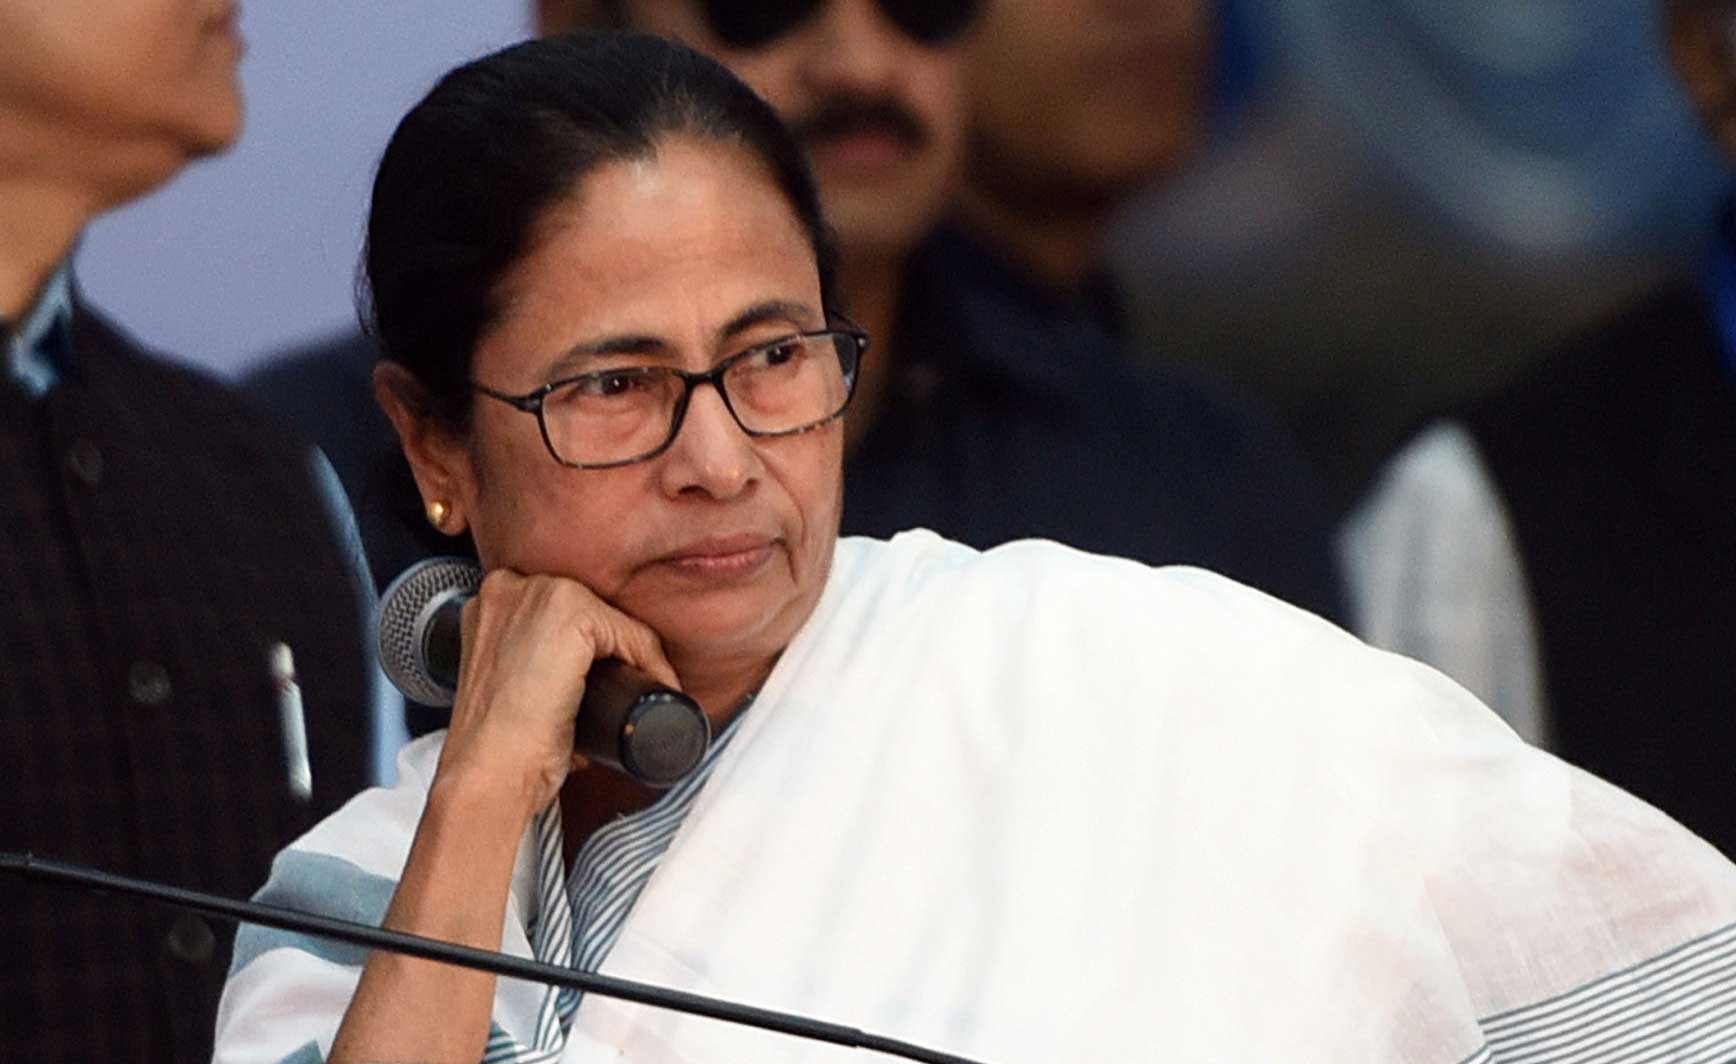 Mamata Banerjee said if the theft claim was true, the country was in “serious danger” under the Modi government.